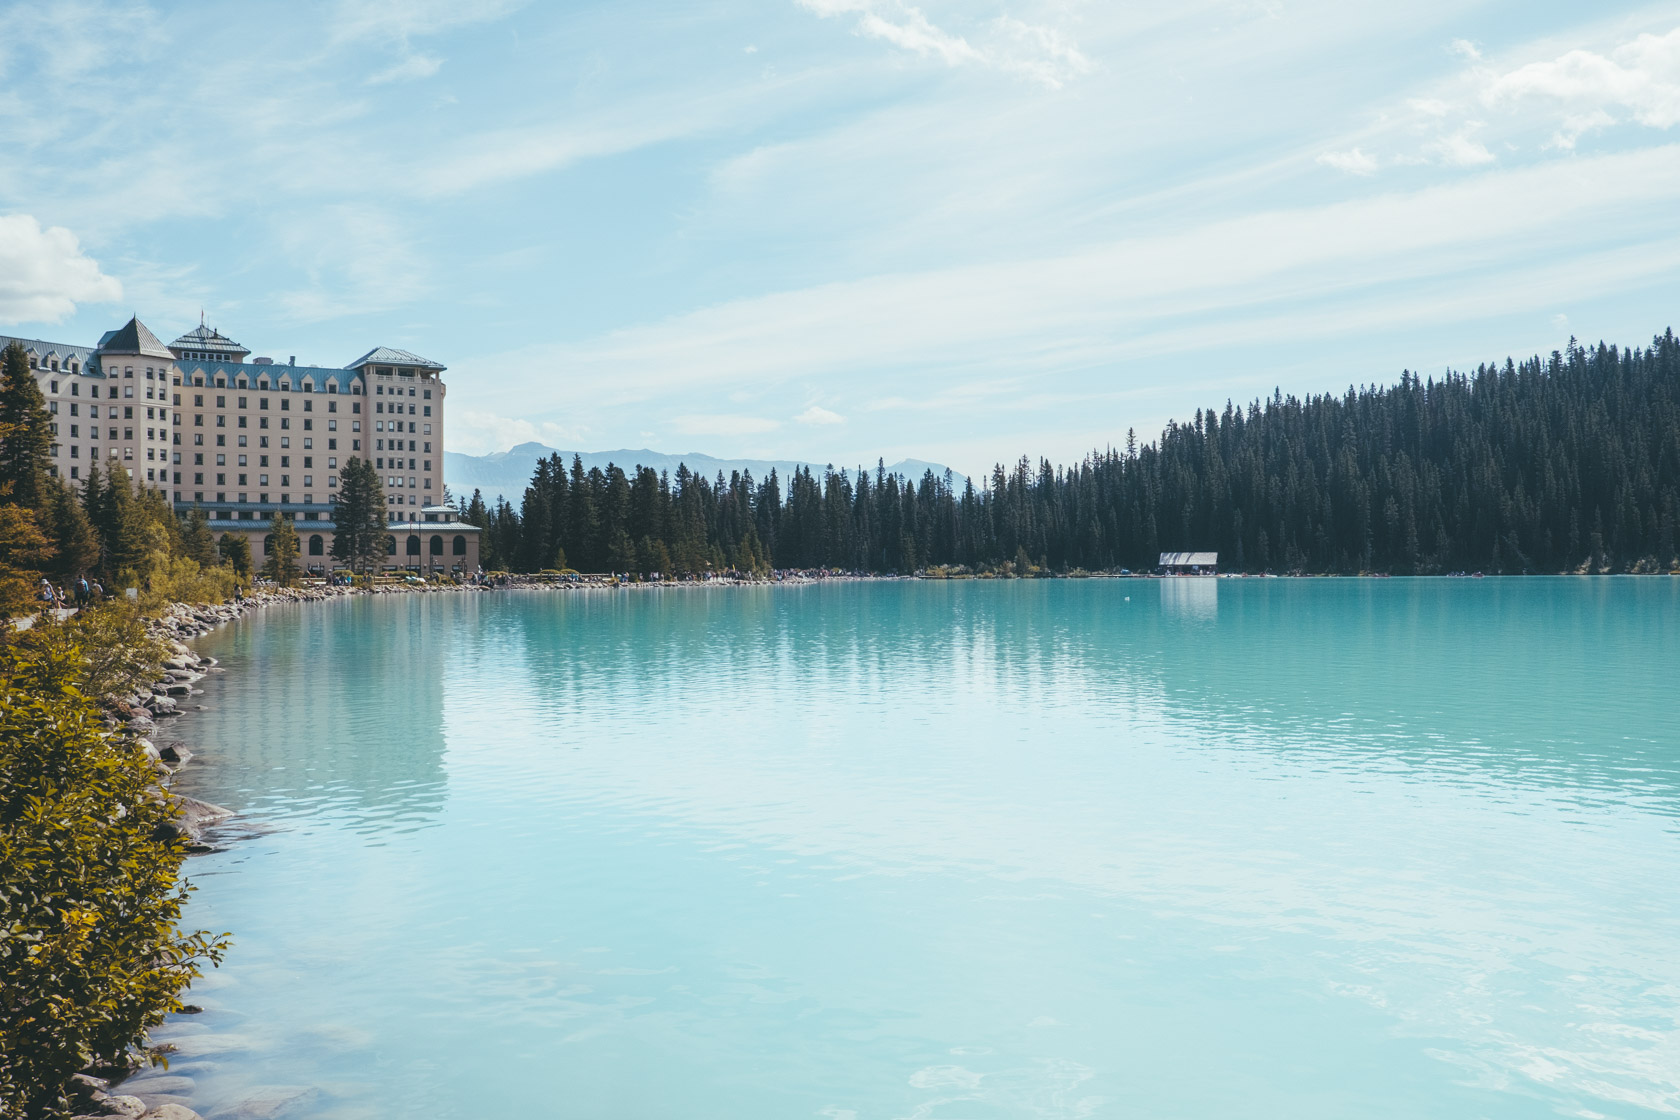 Where to stay in Banff: Lake Louise